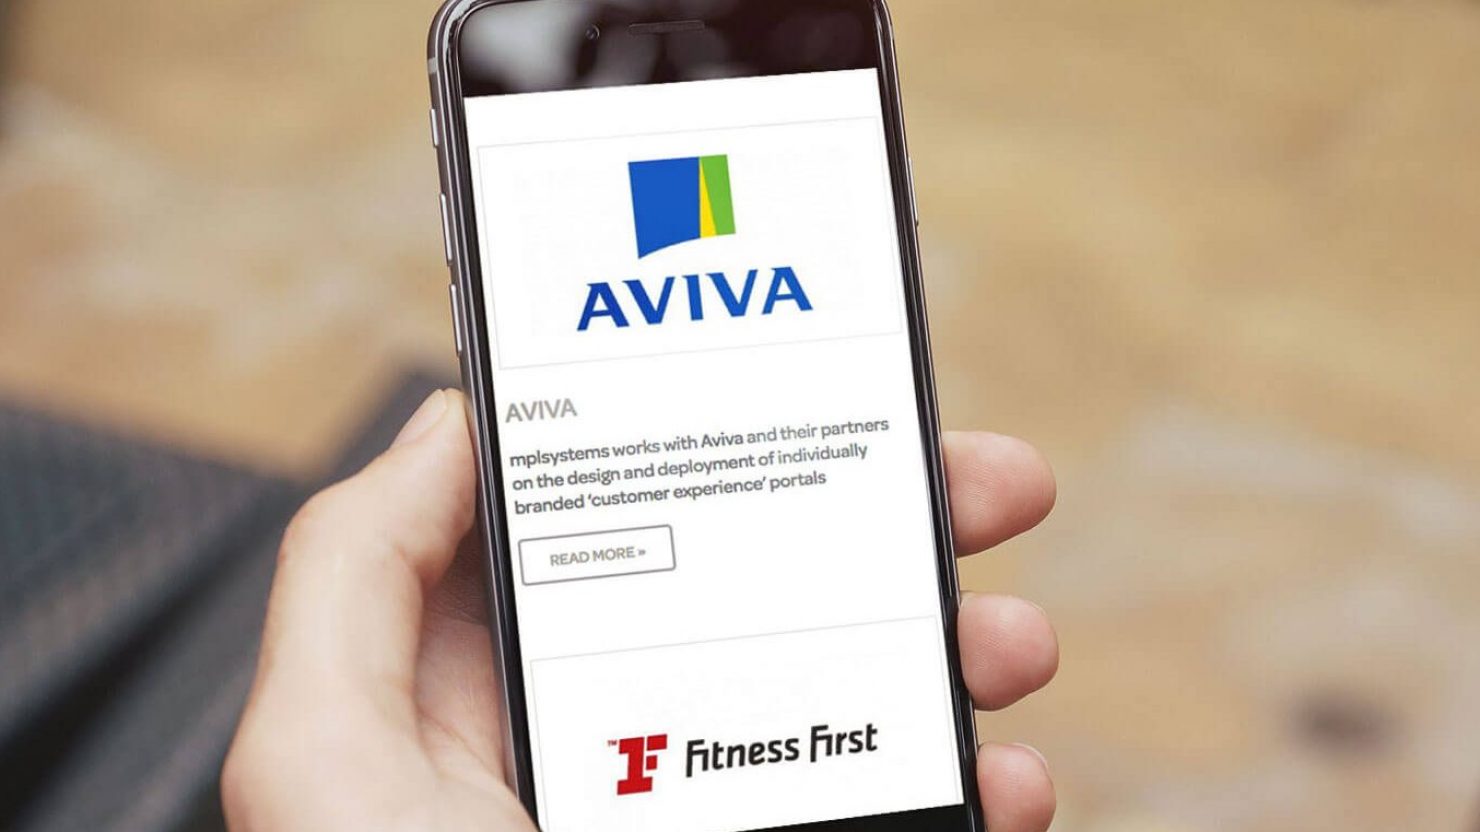 iPhone showing website design and branding for MPL Systems with Aviva and Fitness First logos